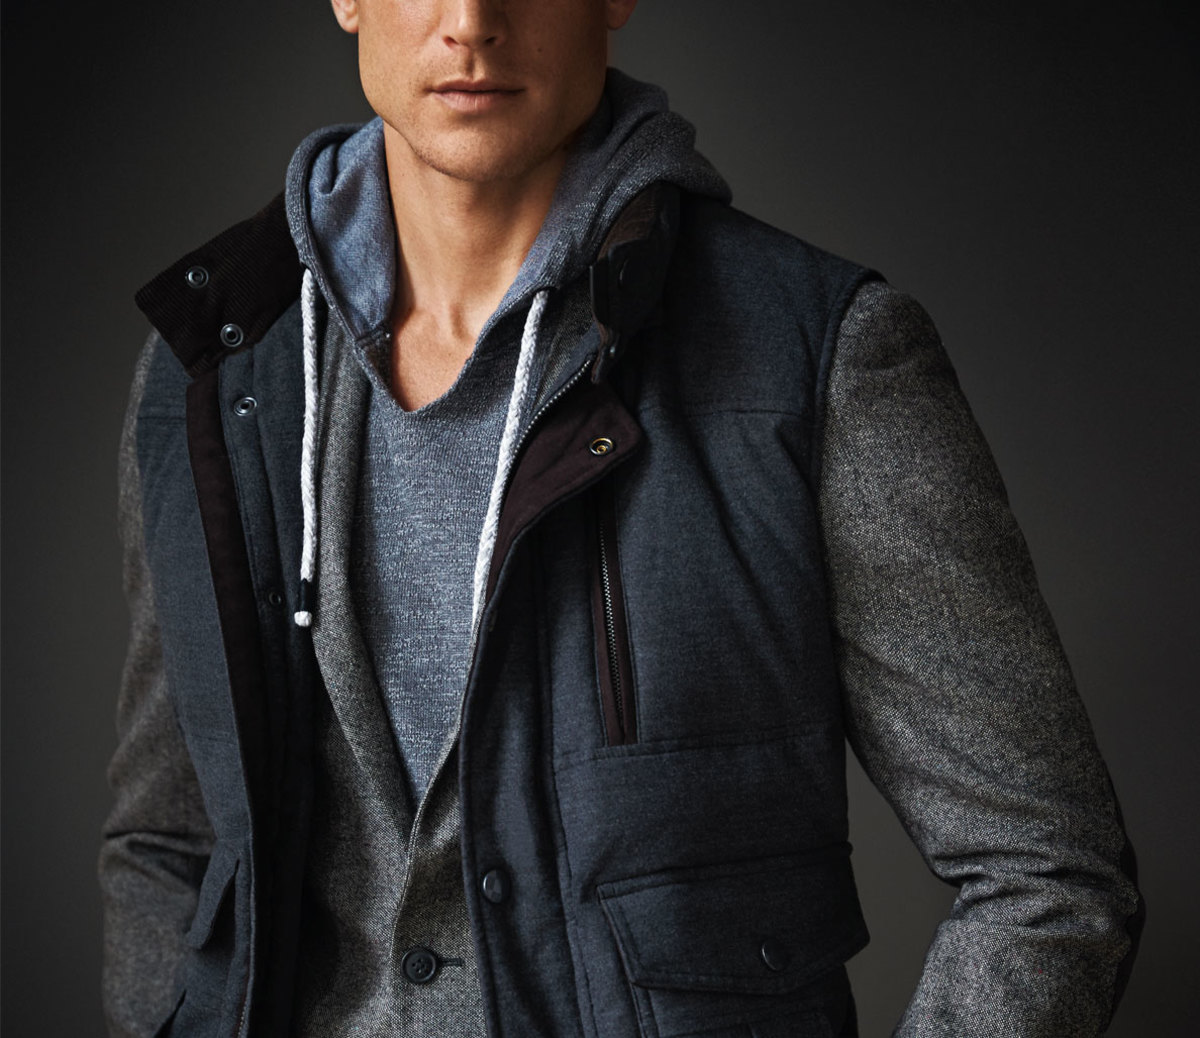 8 Essential Fall Layers - Men's Journal